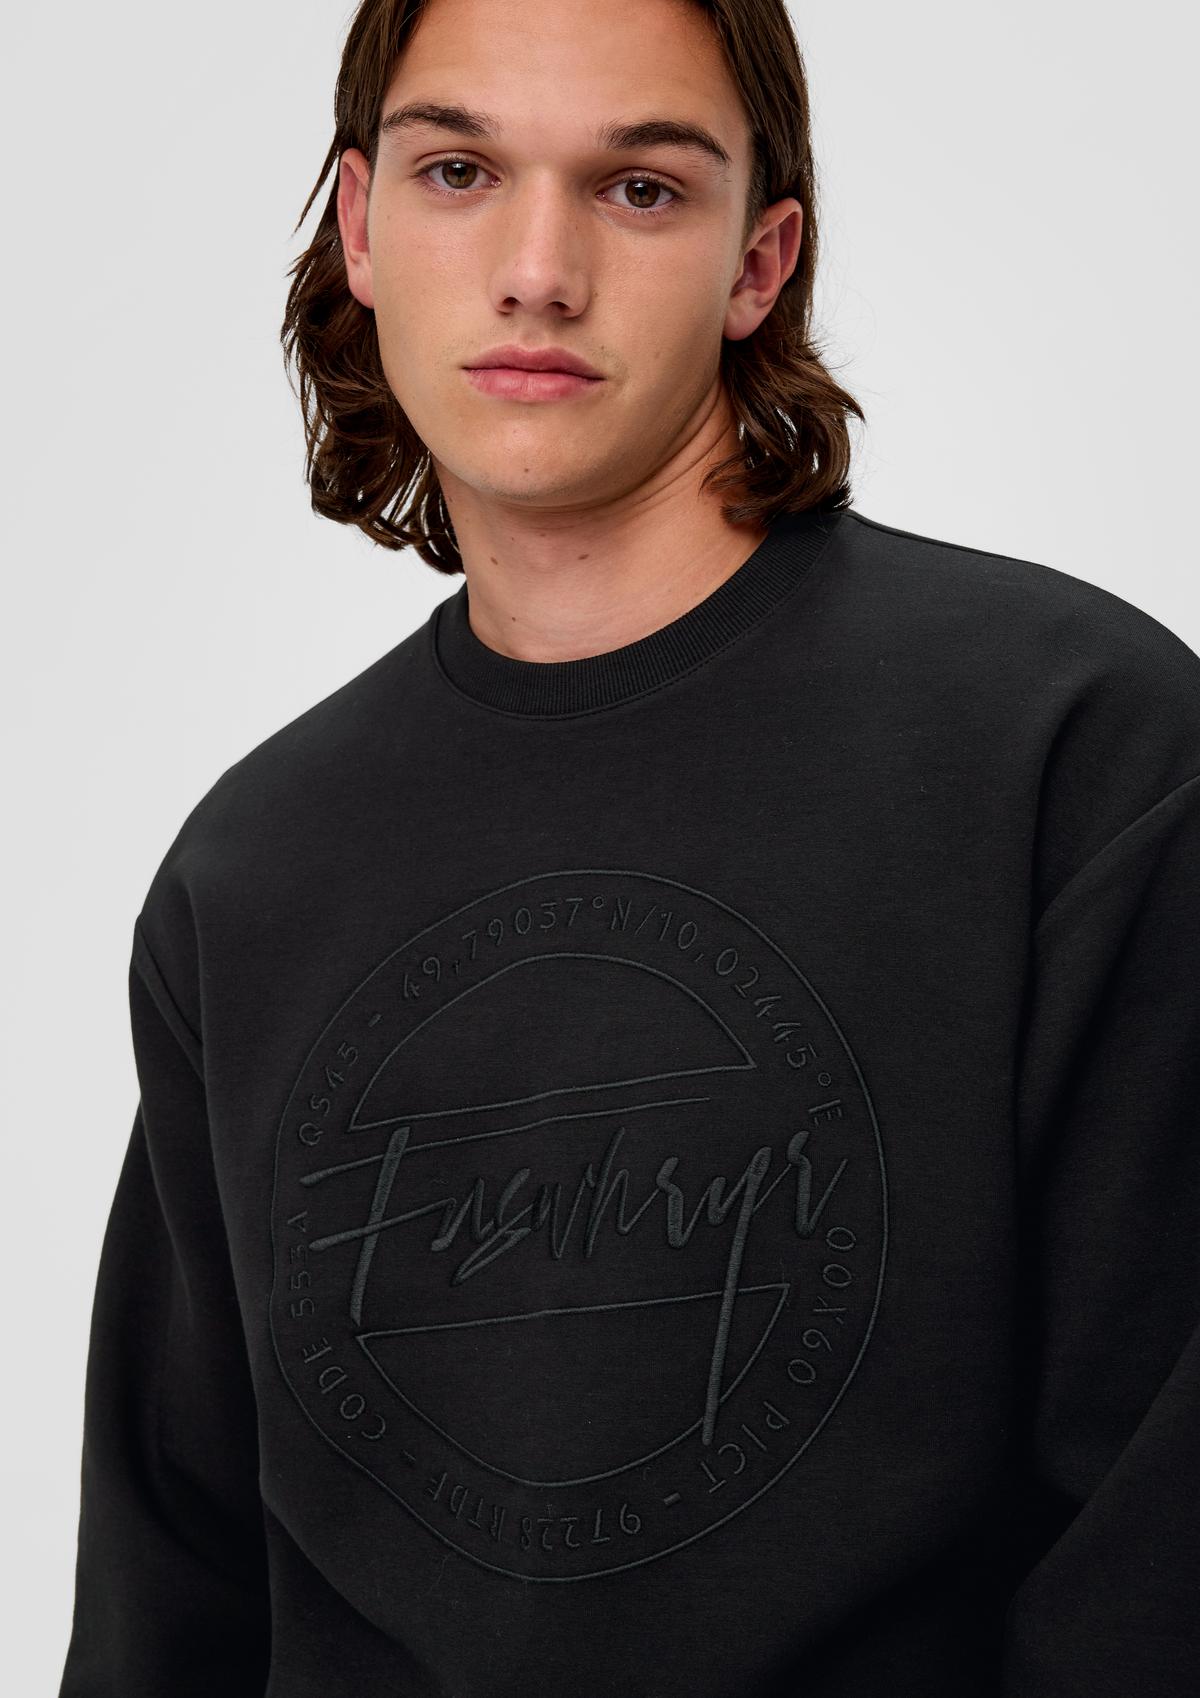 s.Oliver Scuba sweatshirt with embroidery